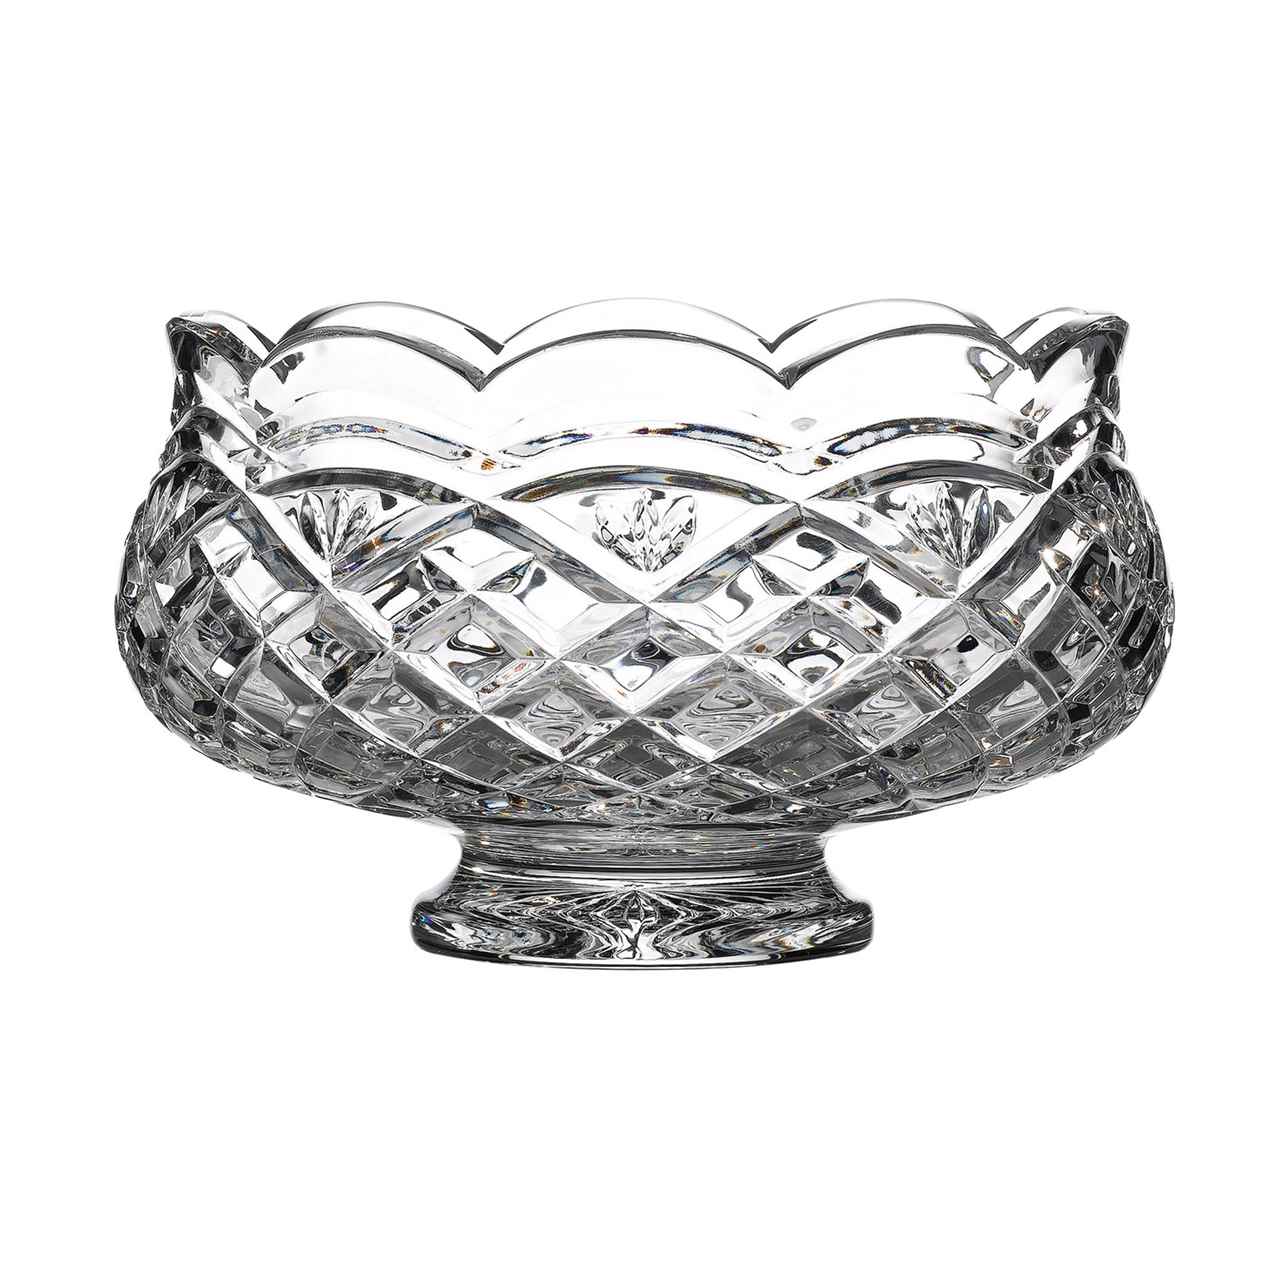  Heritage 20cm Footed Bowl 